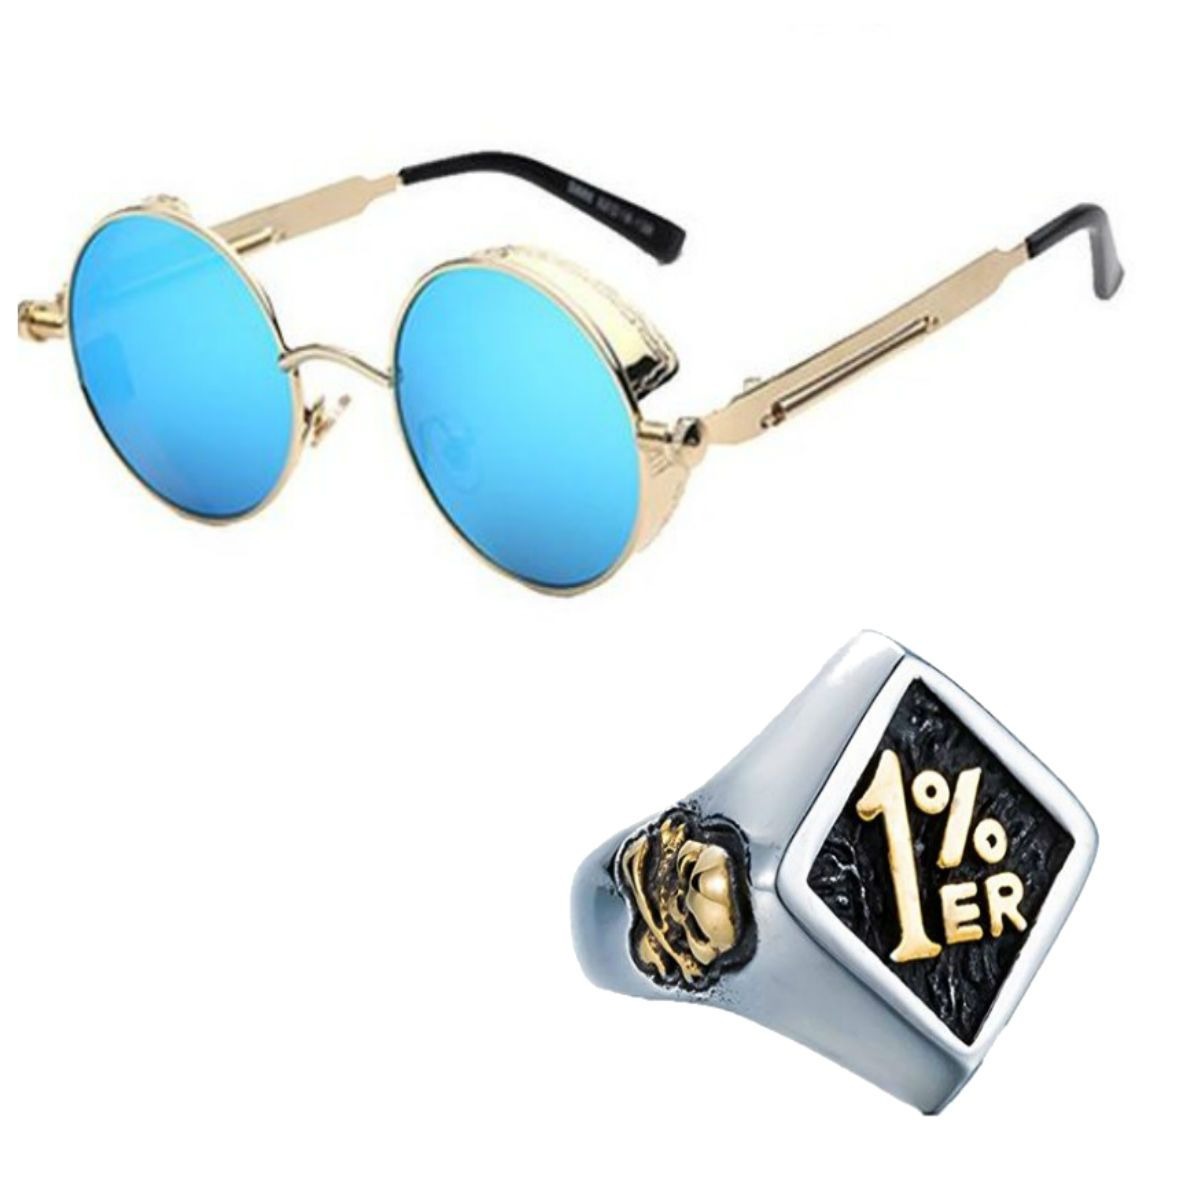 These Rebel Steampunk Sunglasses plus Free 1% Er Ring Bundle are a fashion statement and an expression of your rebellious side, perfect for the biker in you.